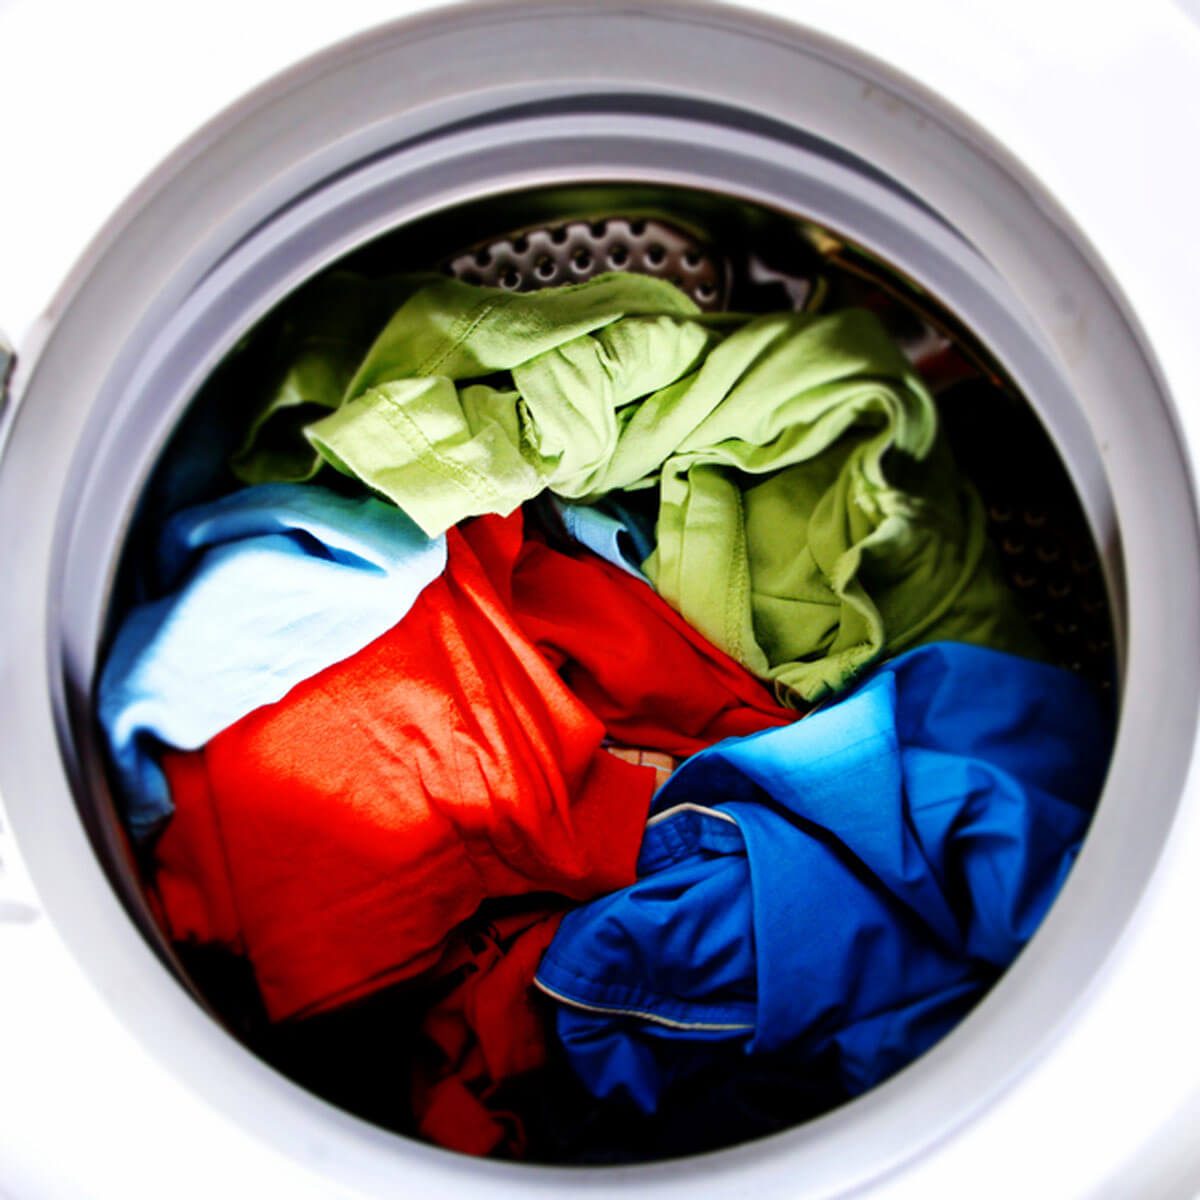 Clothes in washer